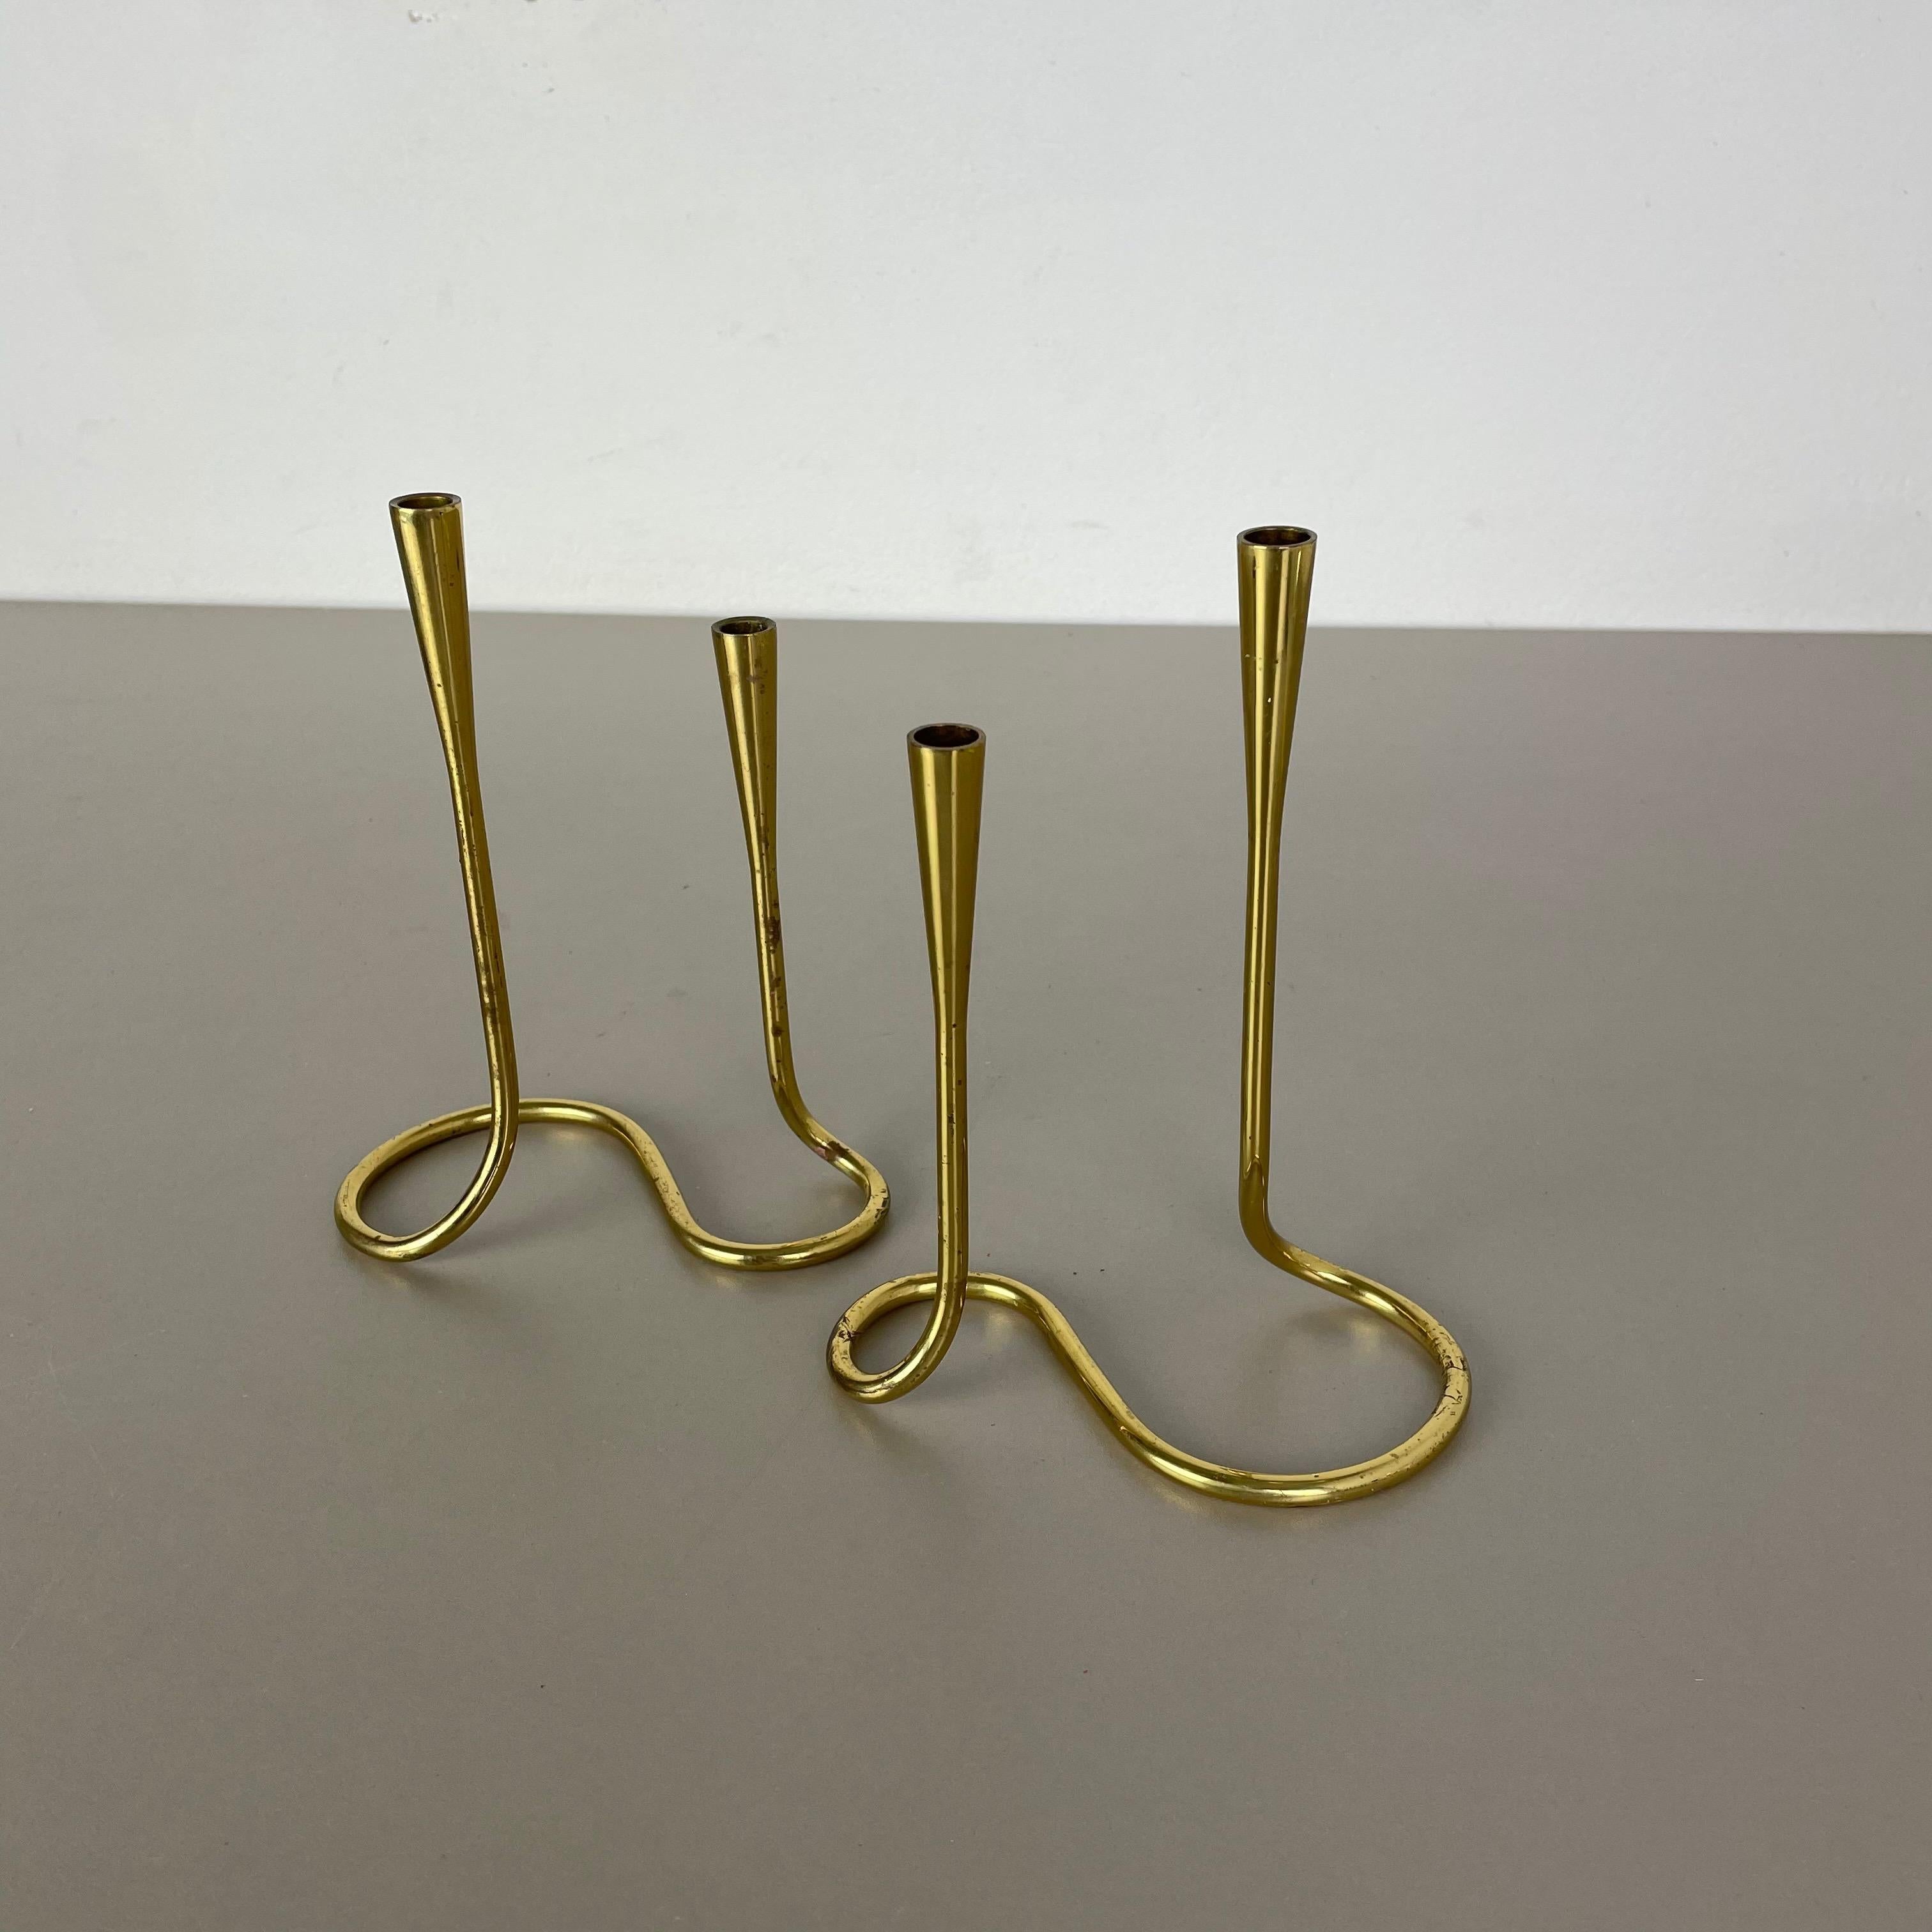 Article:

Sculptural candleholder set of 2


Origin:

Germany (marked on the stand)


Material:

Solid brass


Decade:

1950s




This original vintage candleholder set, was produced in the 1950s in Germany. It is made of solid